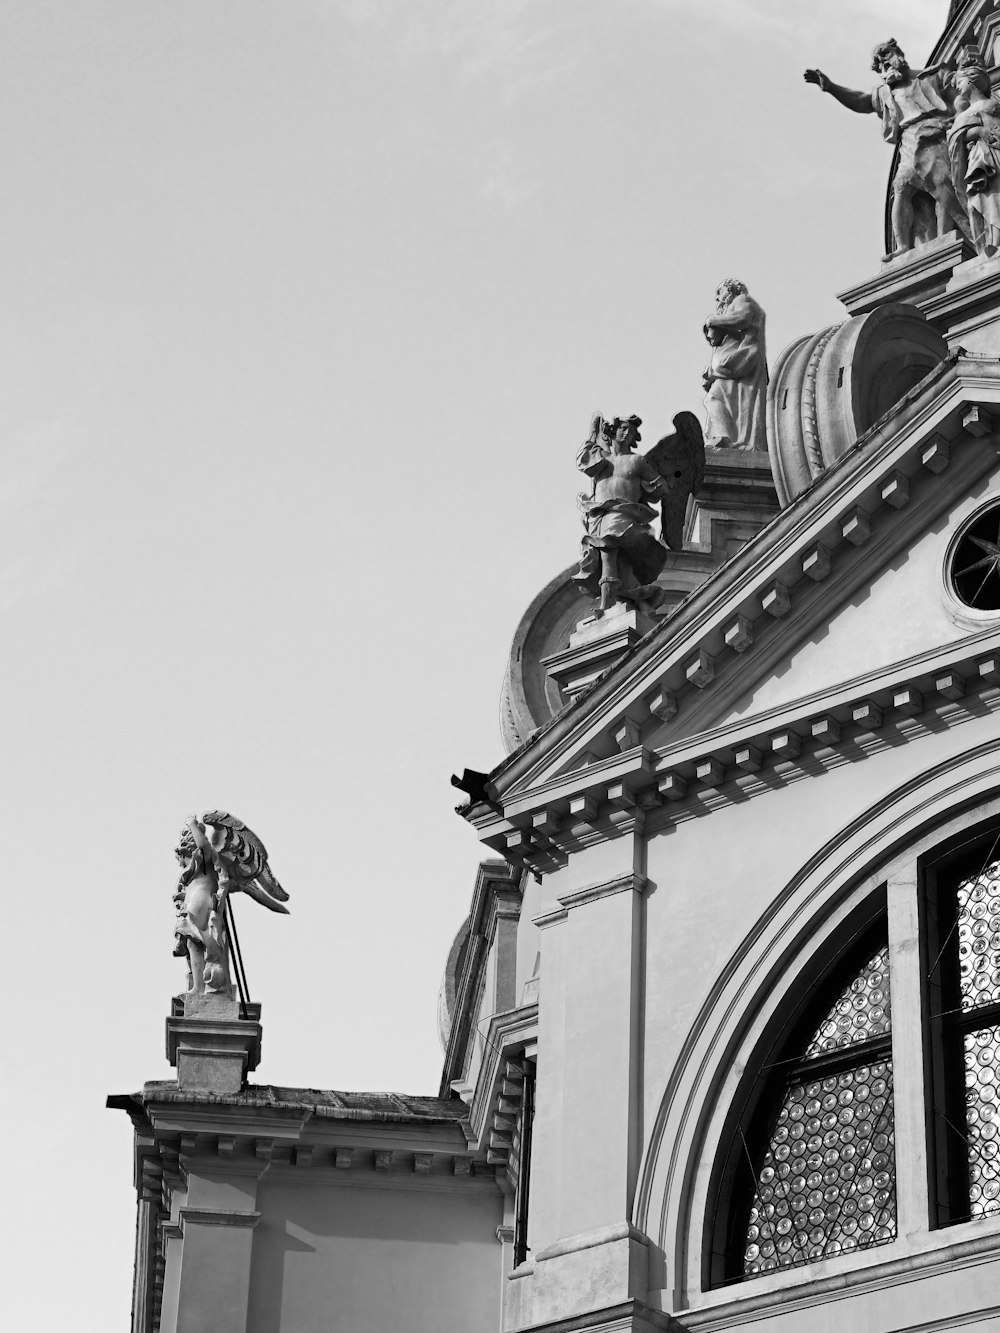 a black and white photo of a building with statues on top